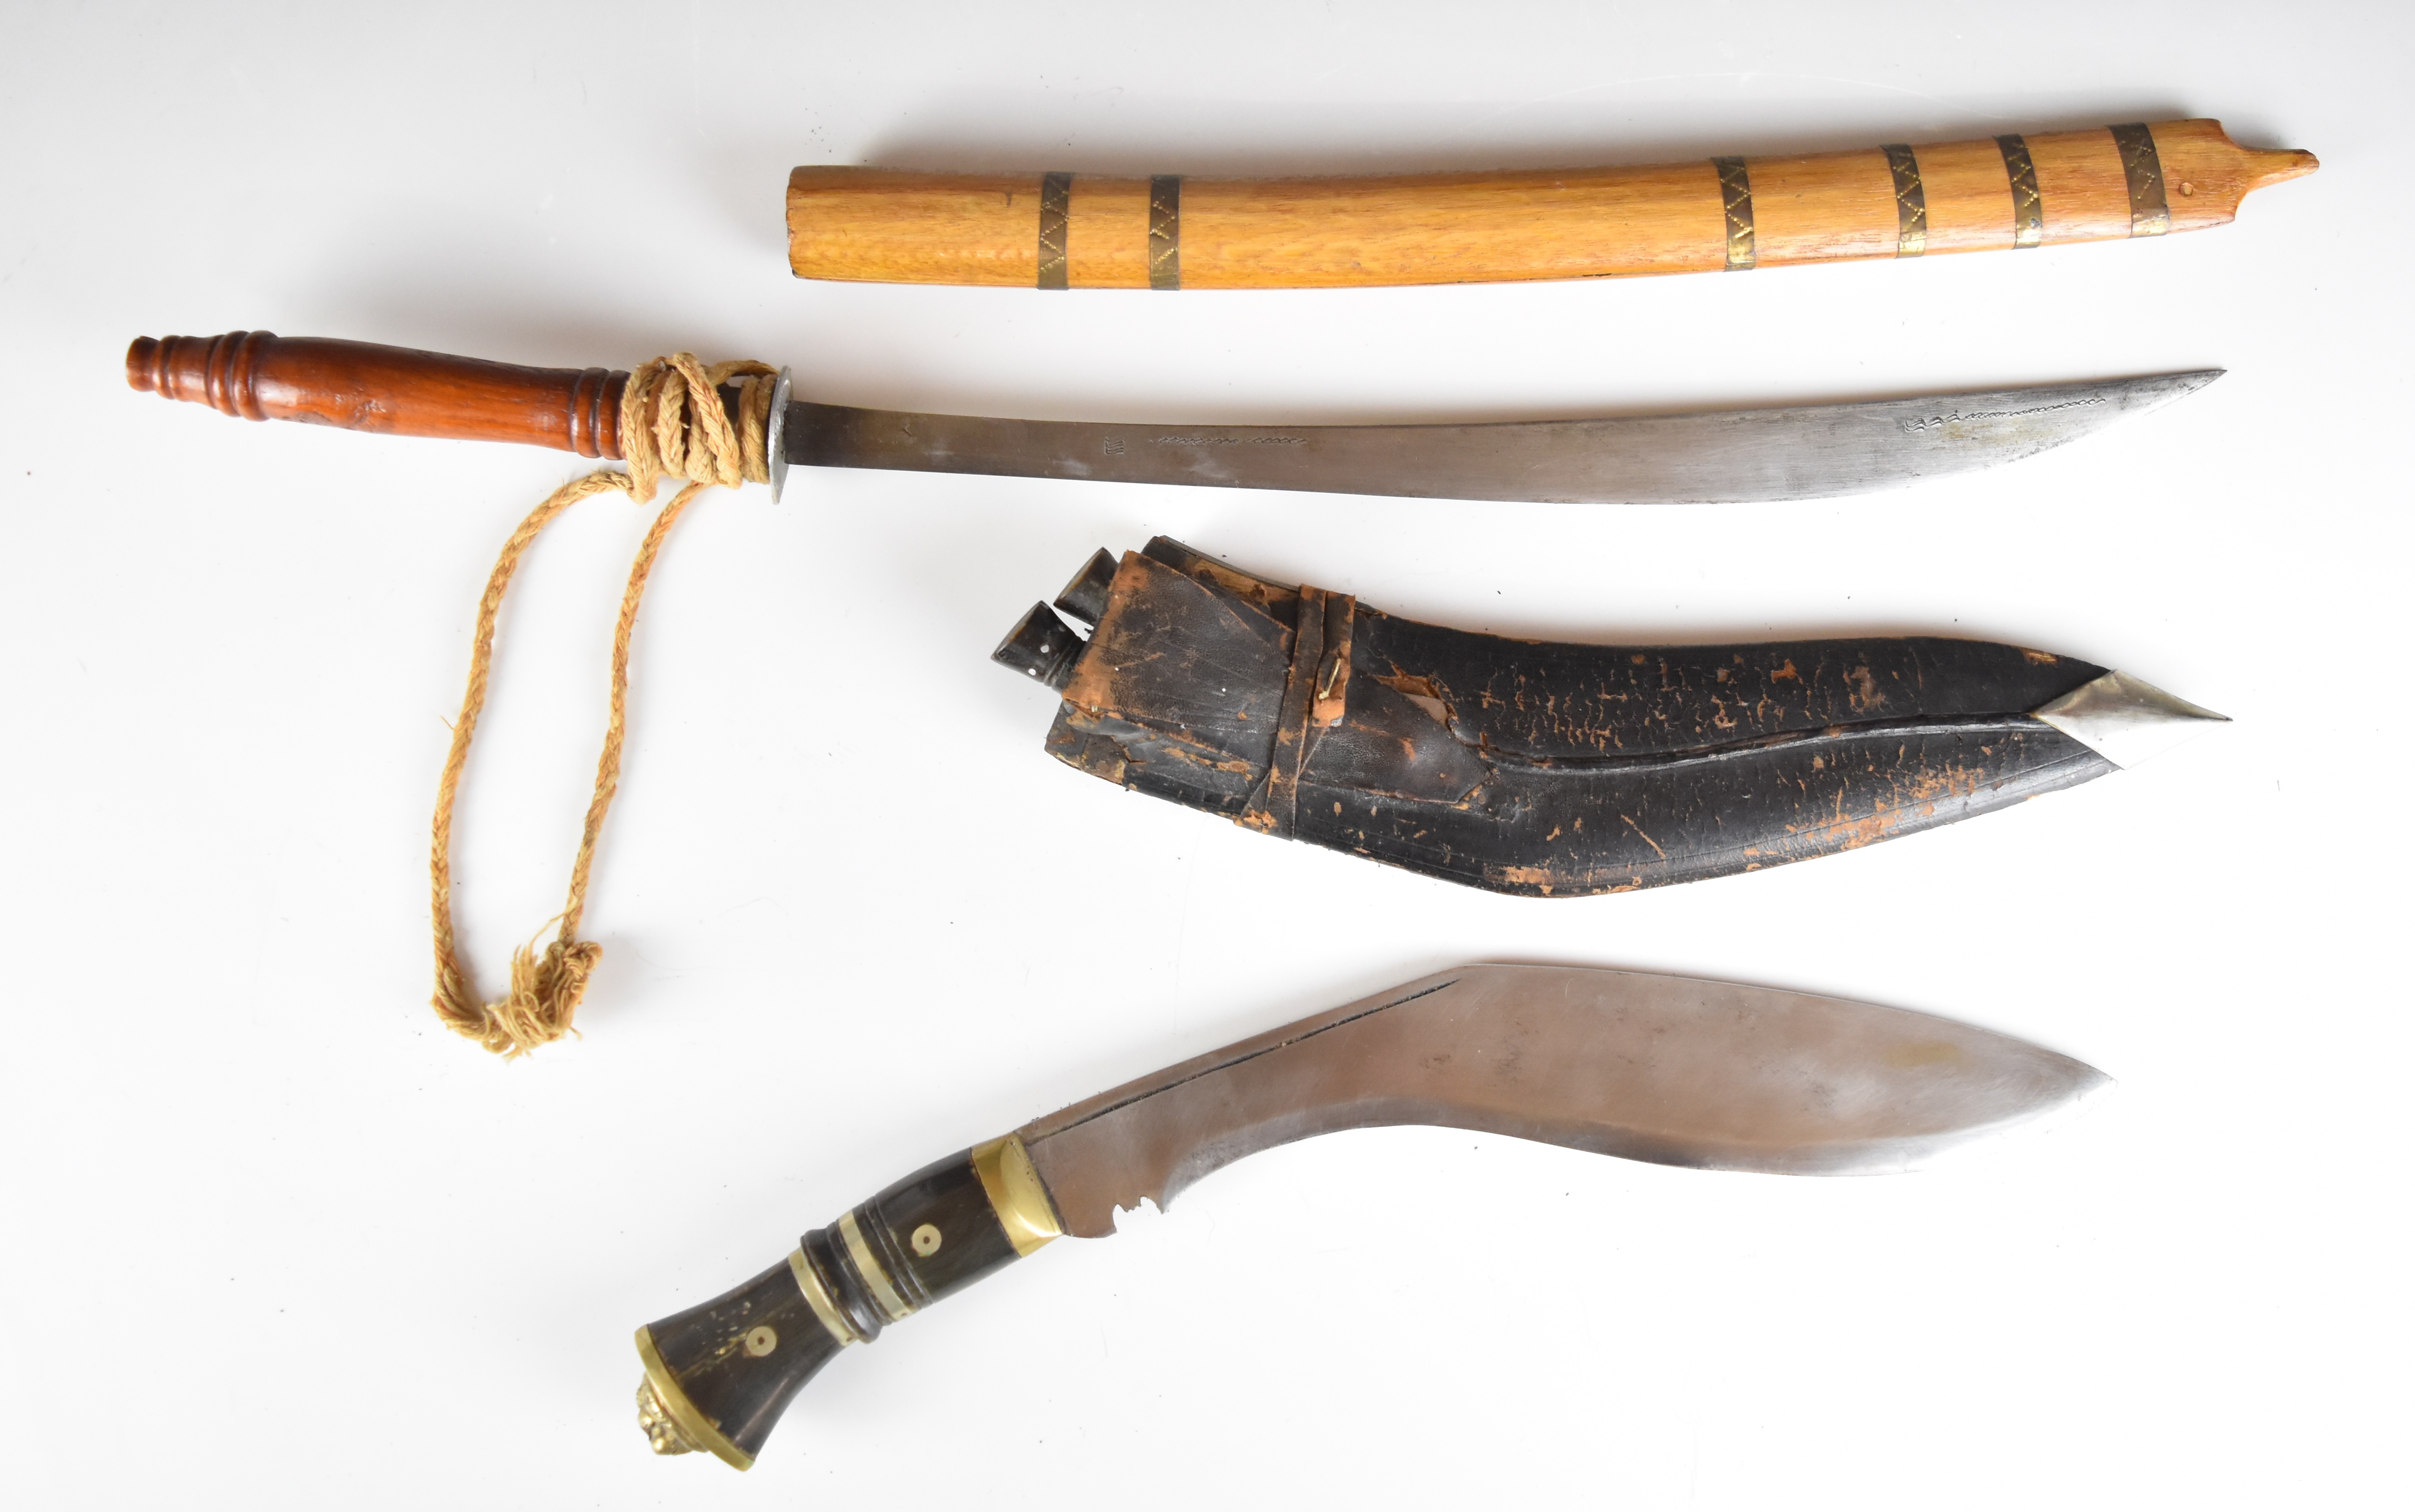 Kukri knife with lion head pommel, 30cm curved blade, scabbard and matching karda and chakmak,